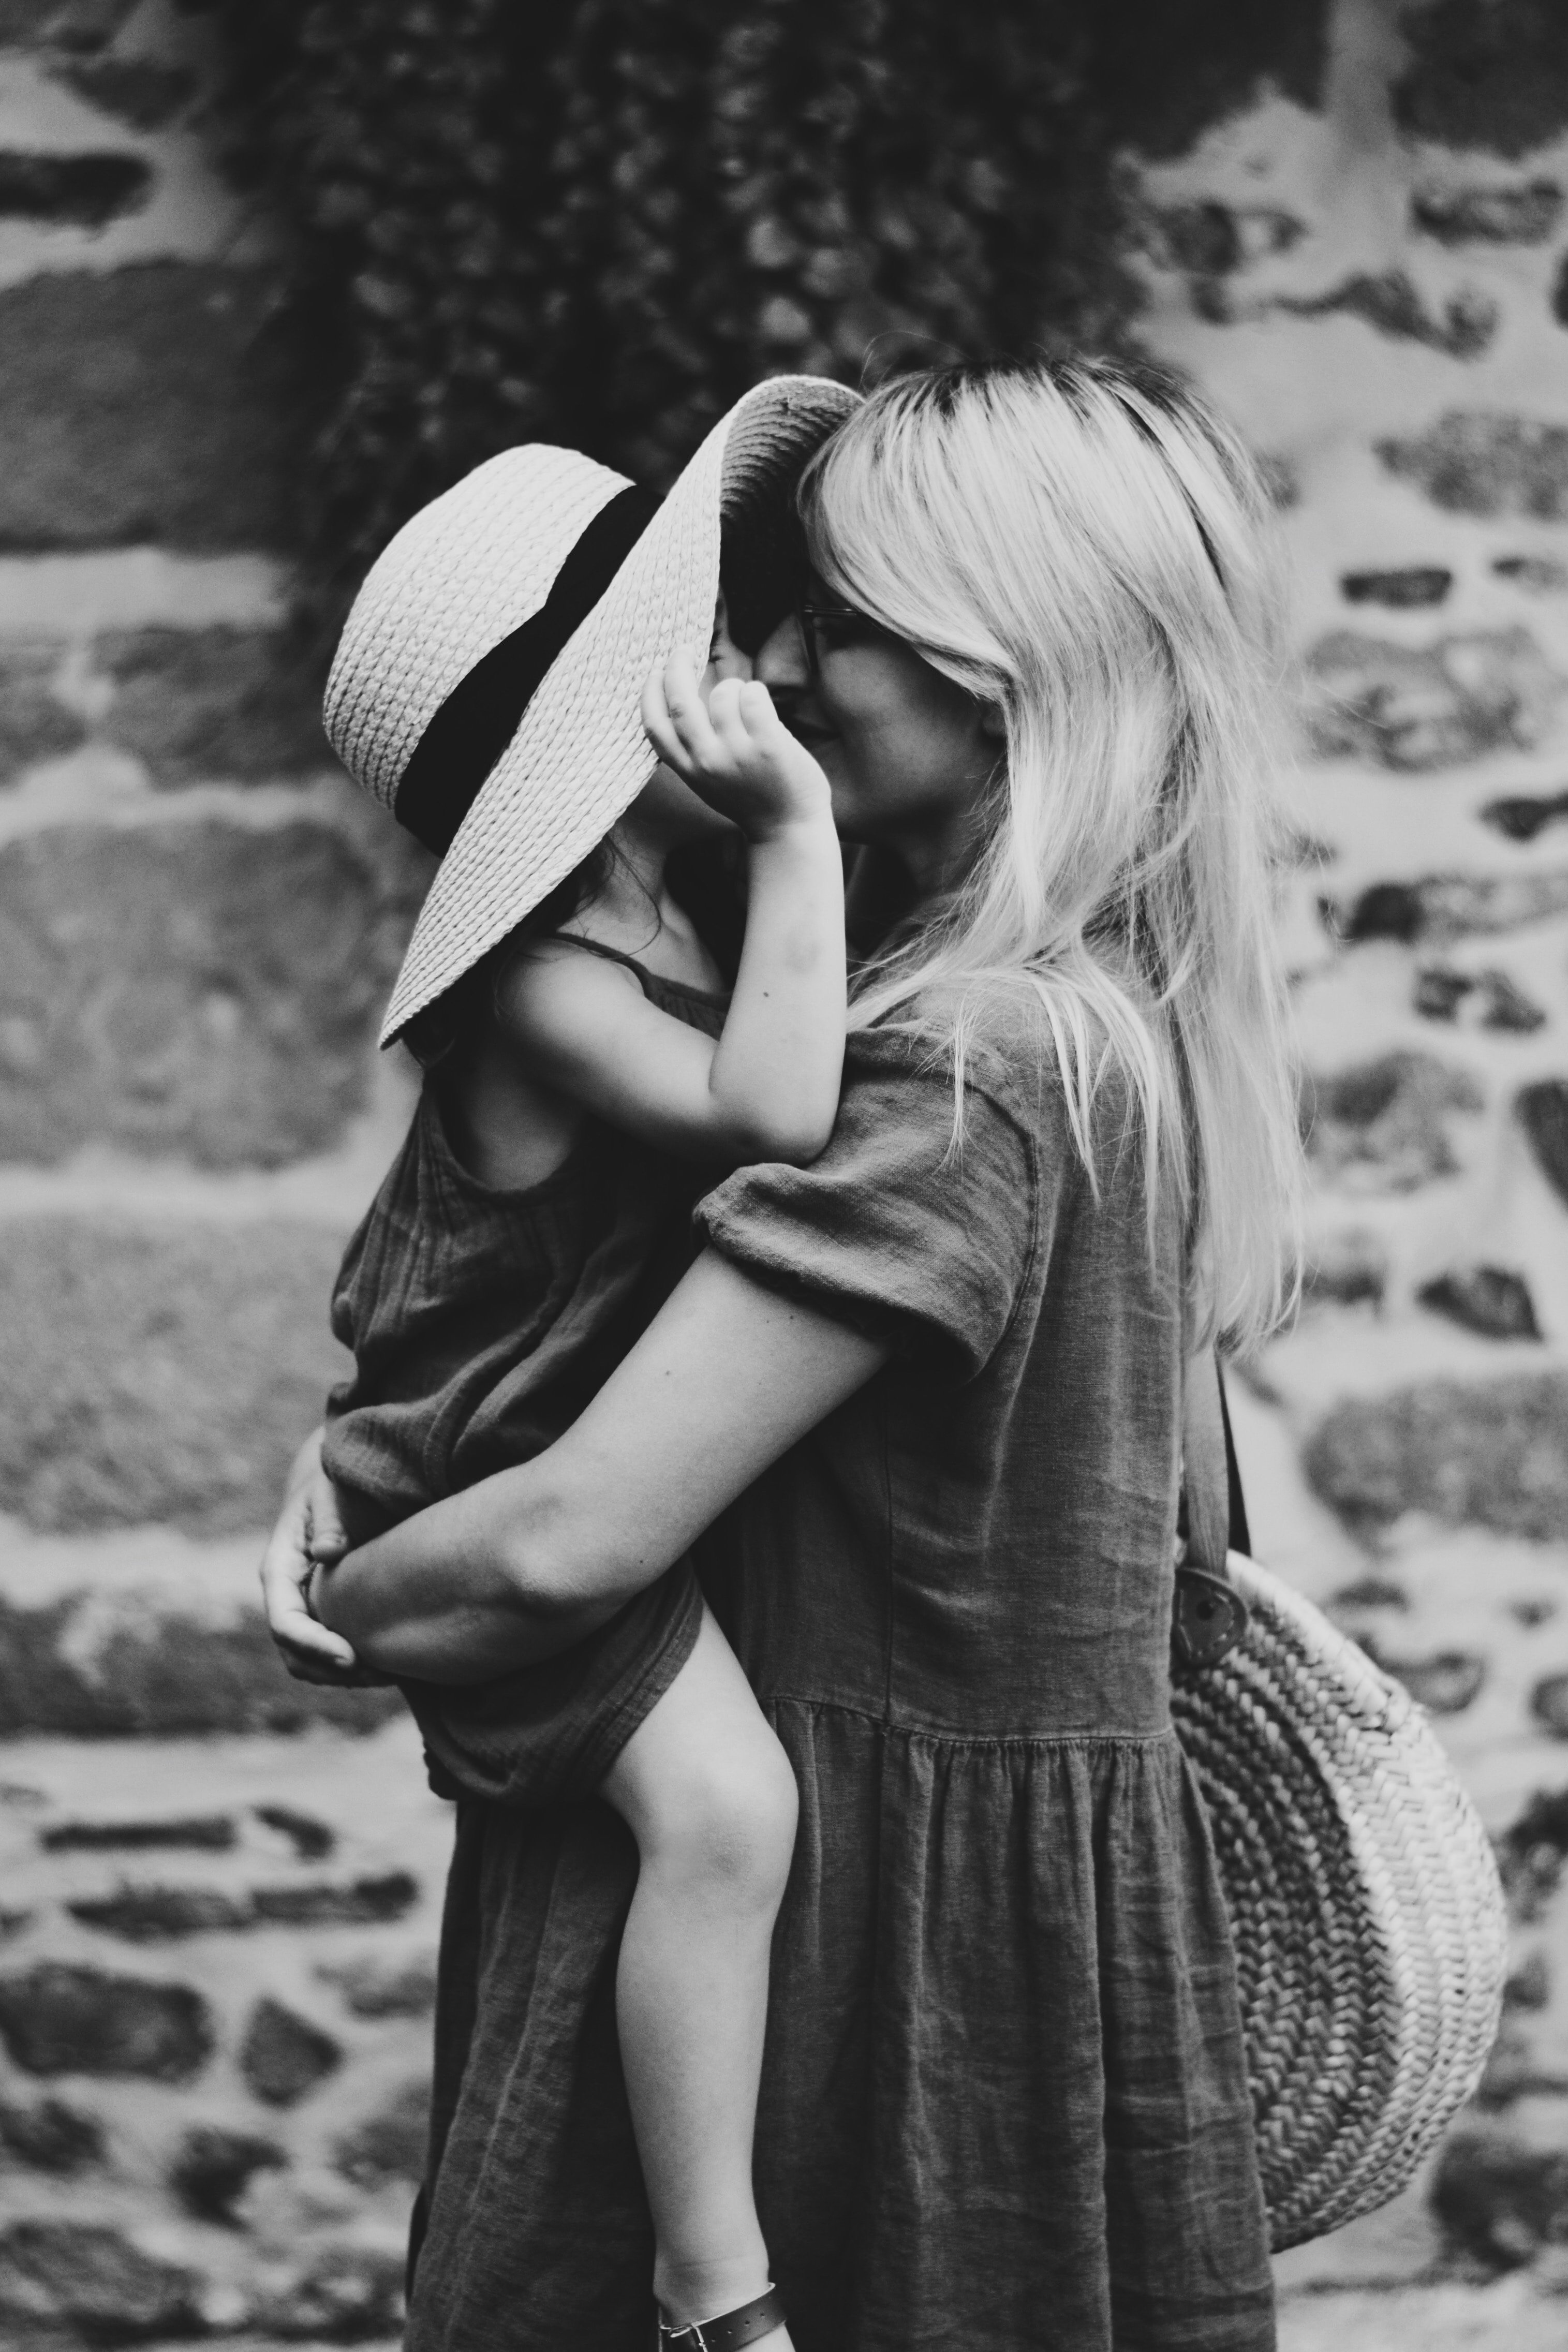 A monochrome picture of a mother and daughter. | Source: Unsplash